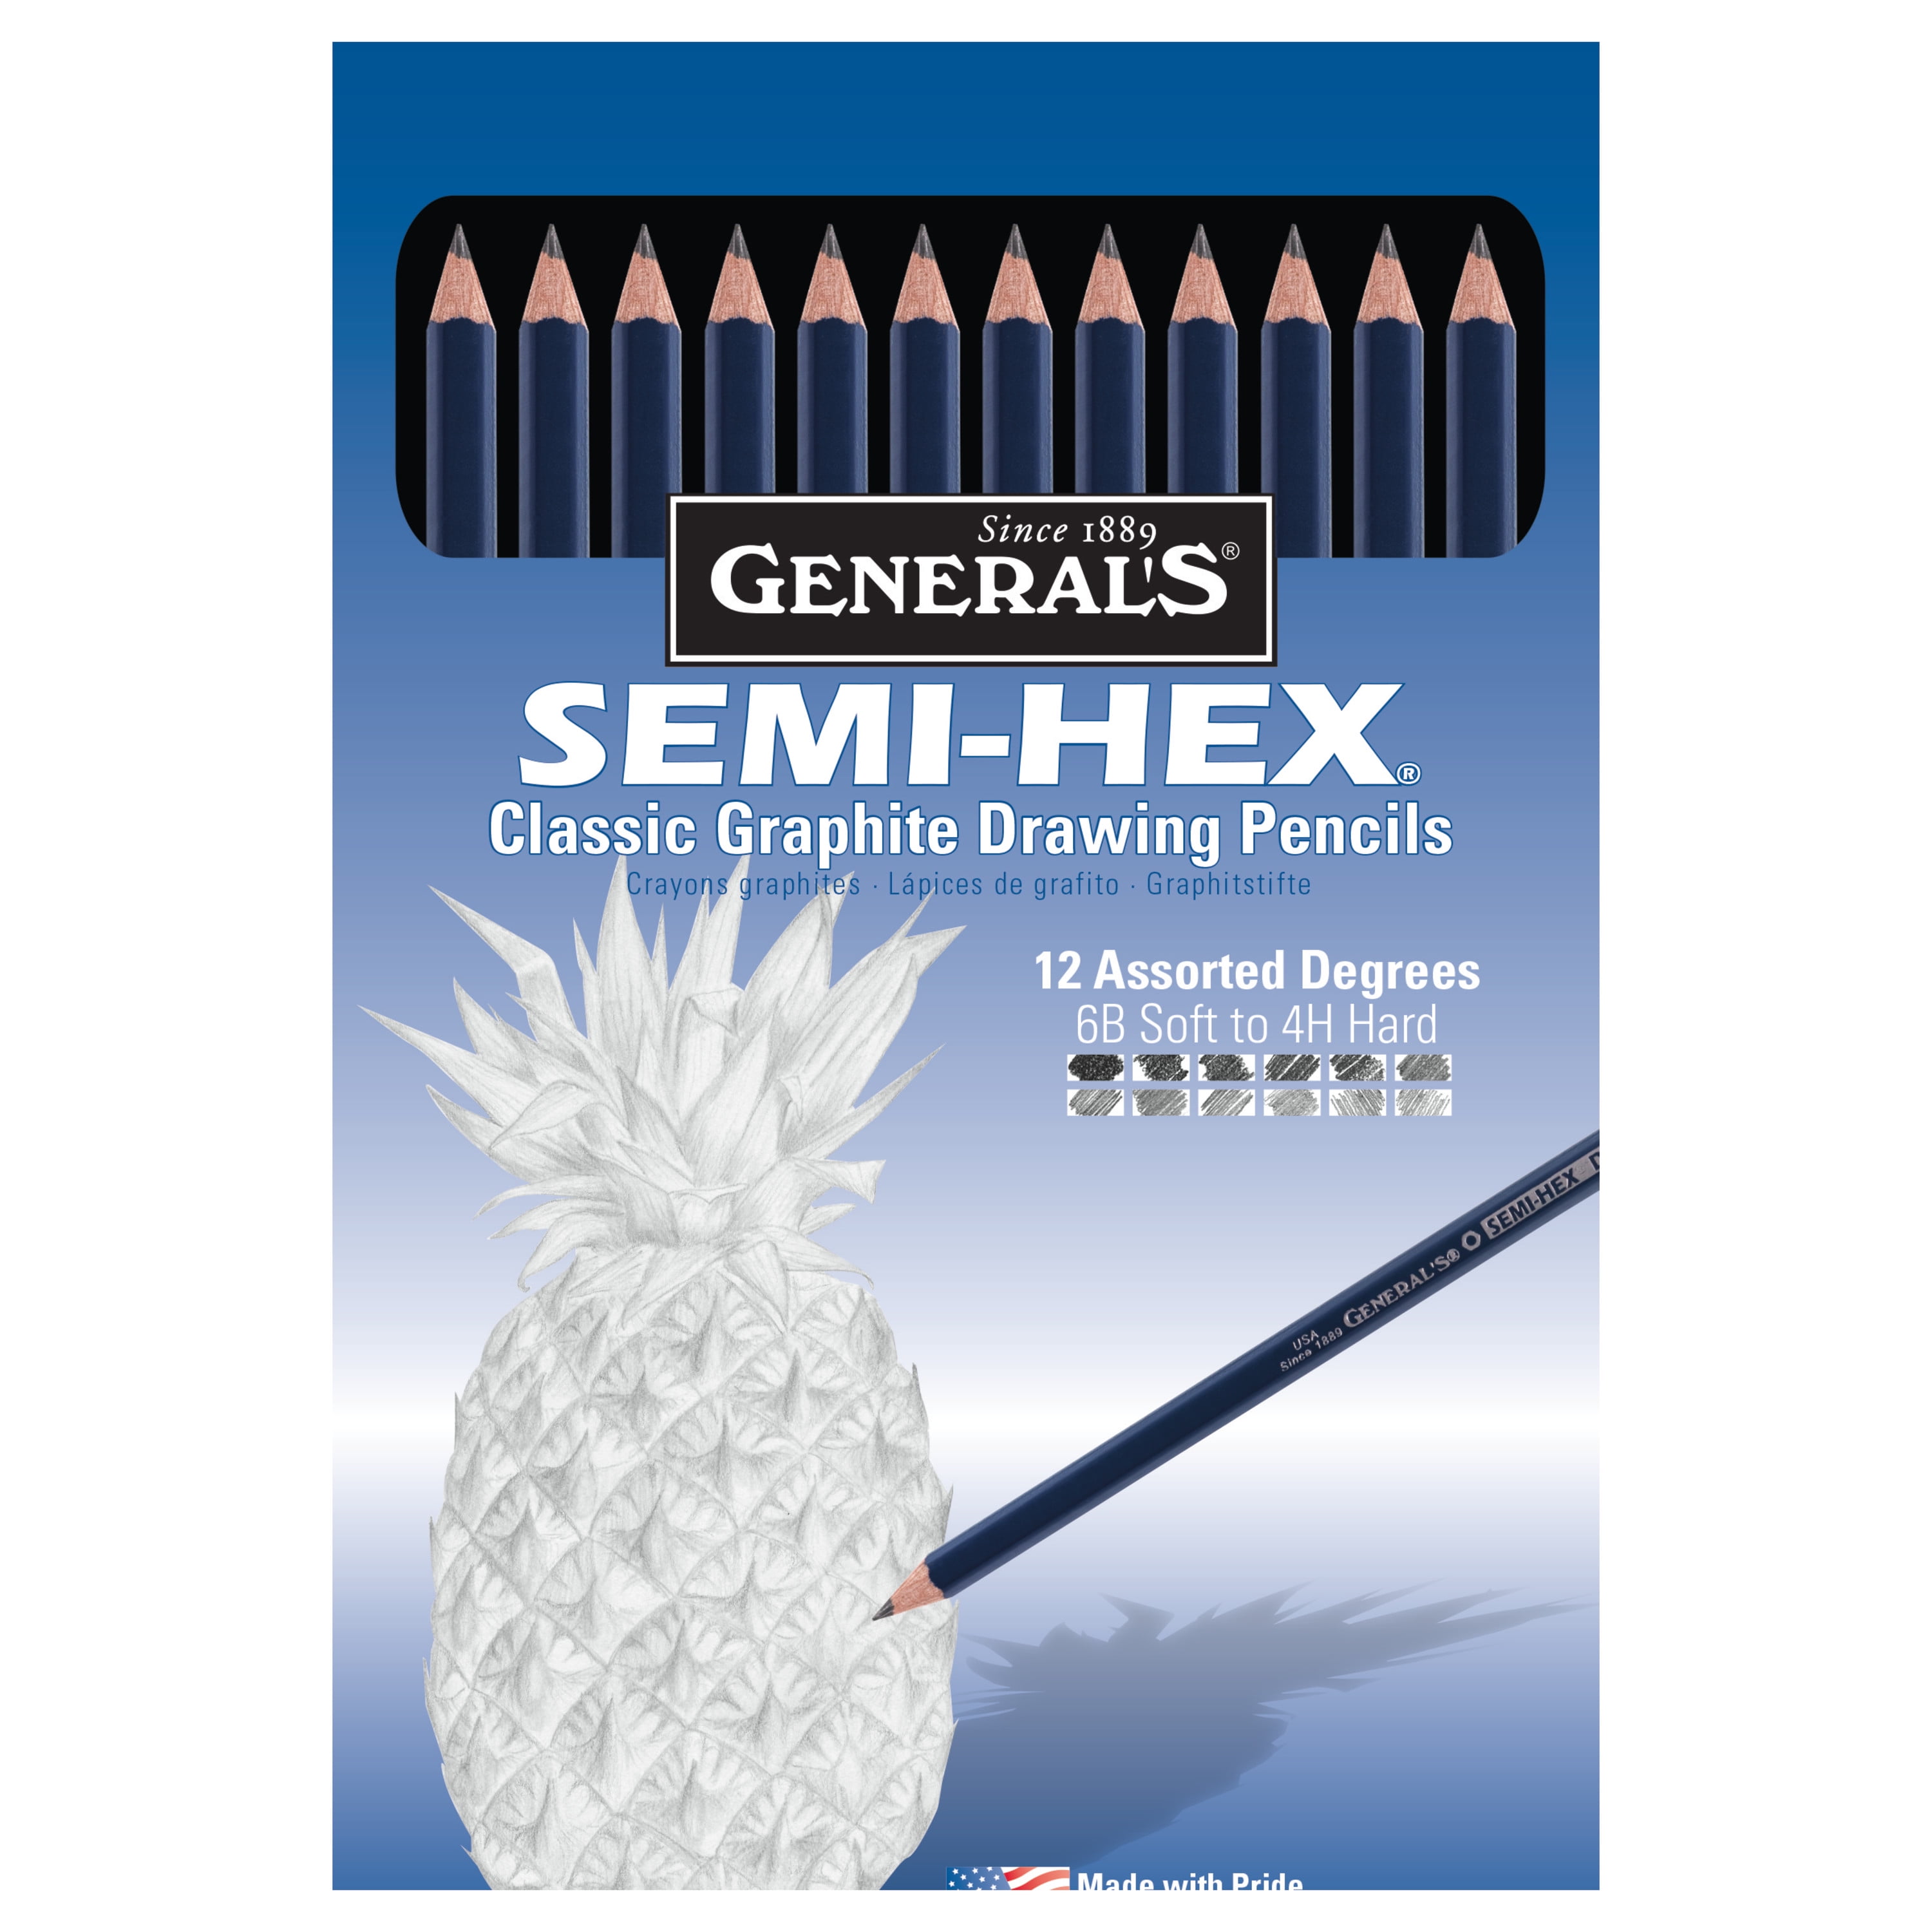 Scsp-406762-sax Solid Drawing Pencil 4b Tip Black Pack of 12 for sale online 